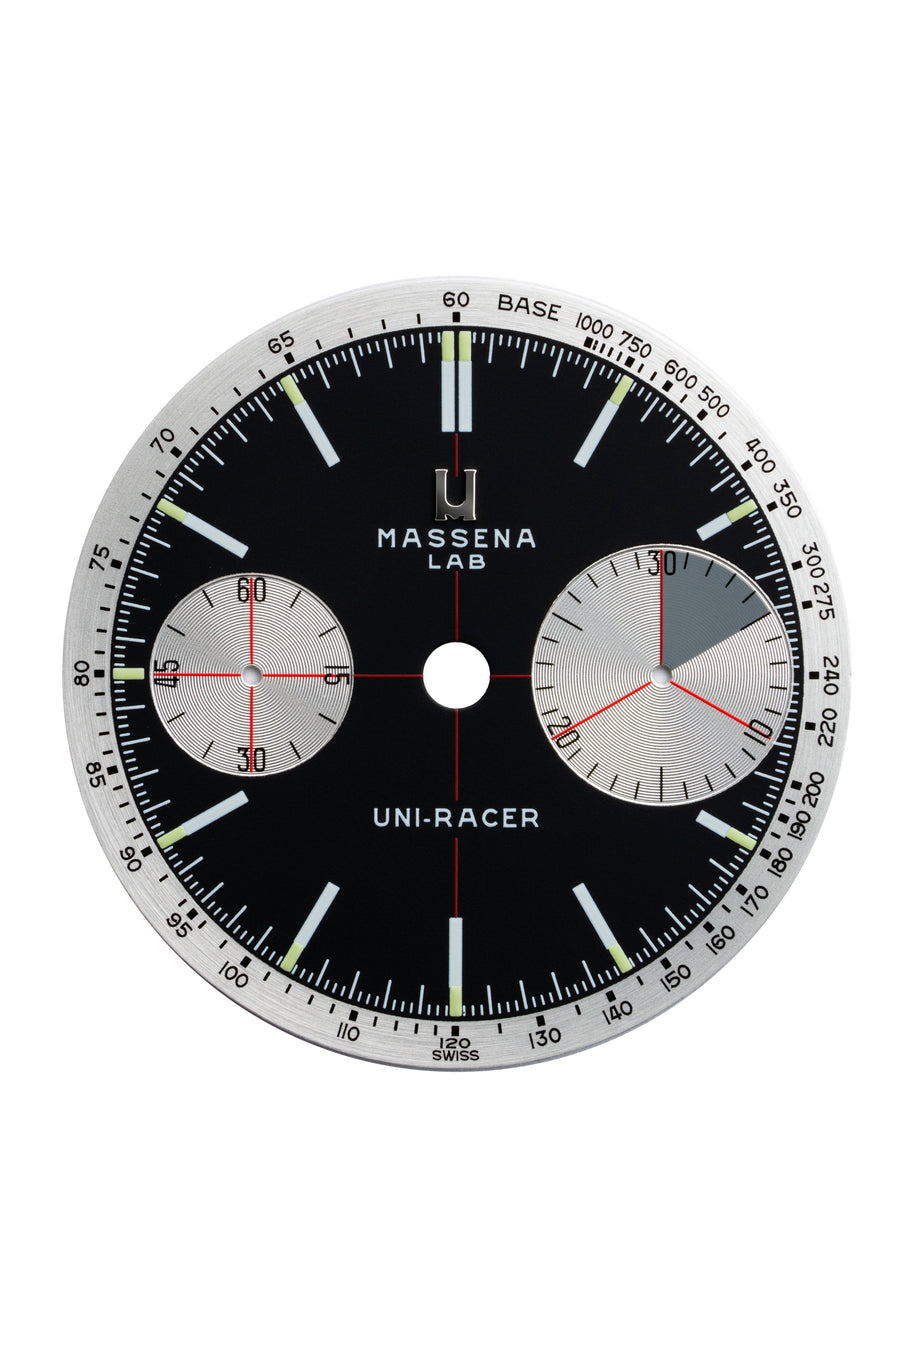 The dial of the Massena LAB Uni-Racer is configured in a "Reverse Panda" black dial with silver subdials, and features a 30 minutes "Big Eye" counter as well as a small seconds counter.